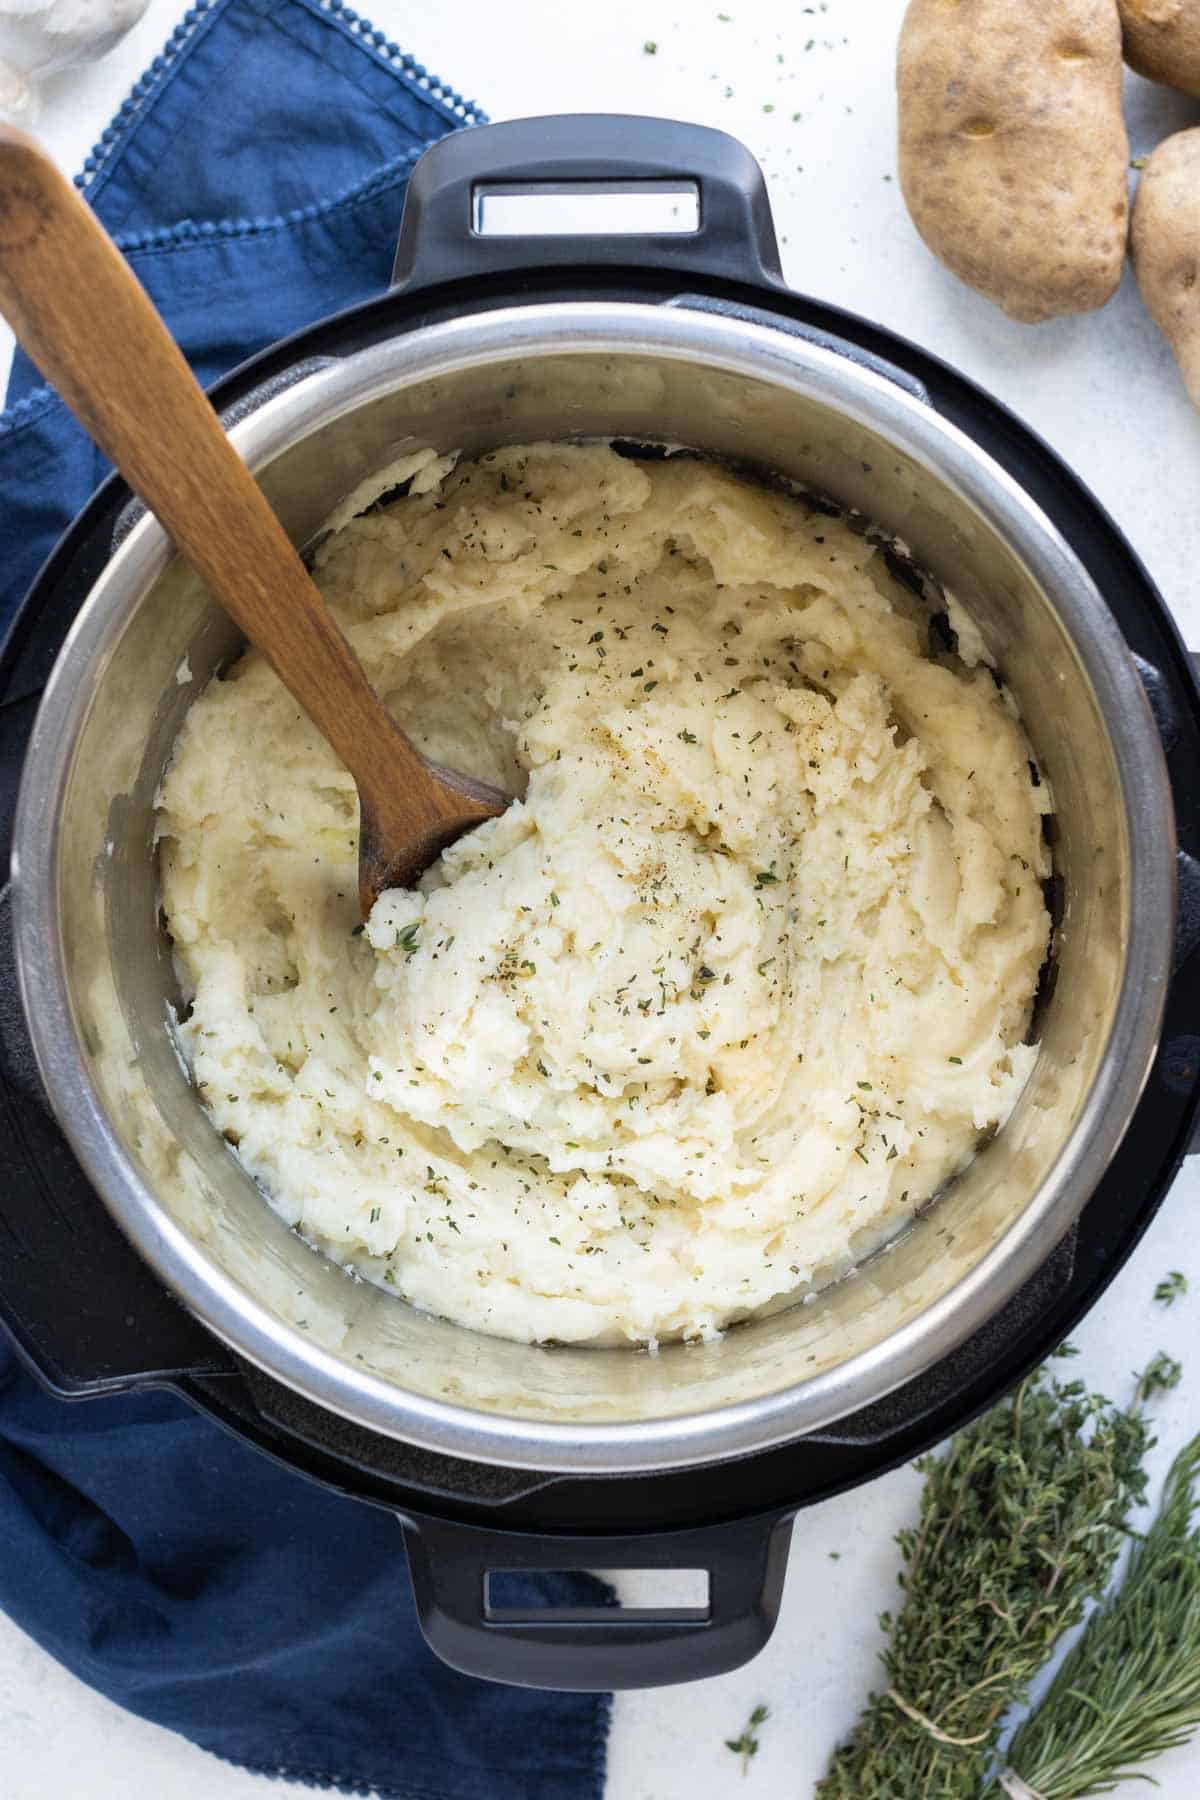 You can quickly make garlic mashed potatoes in an Instant Pot.